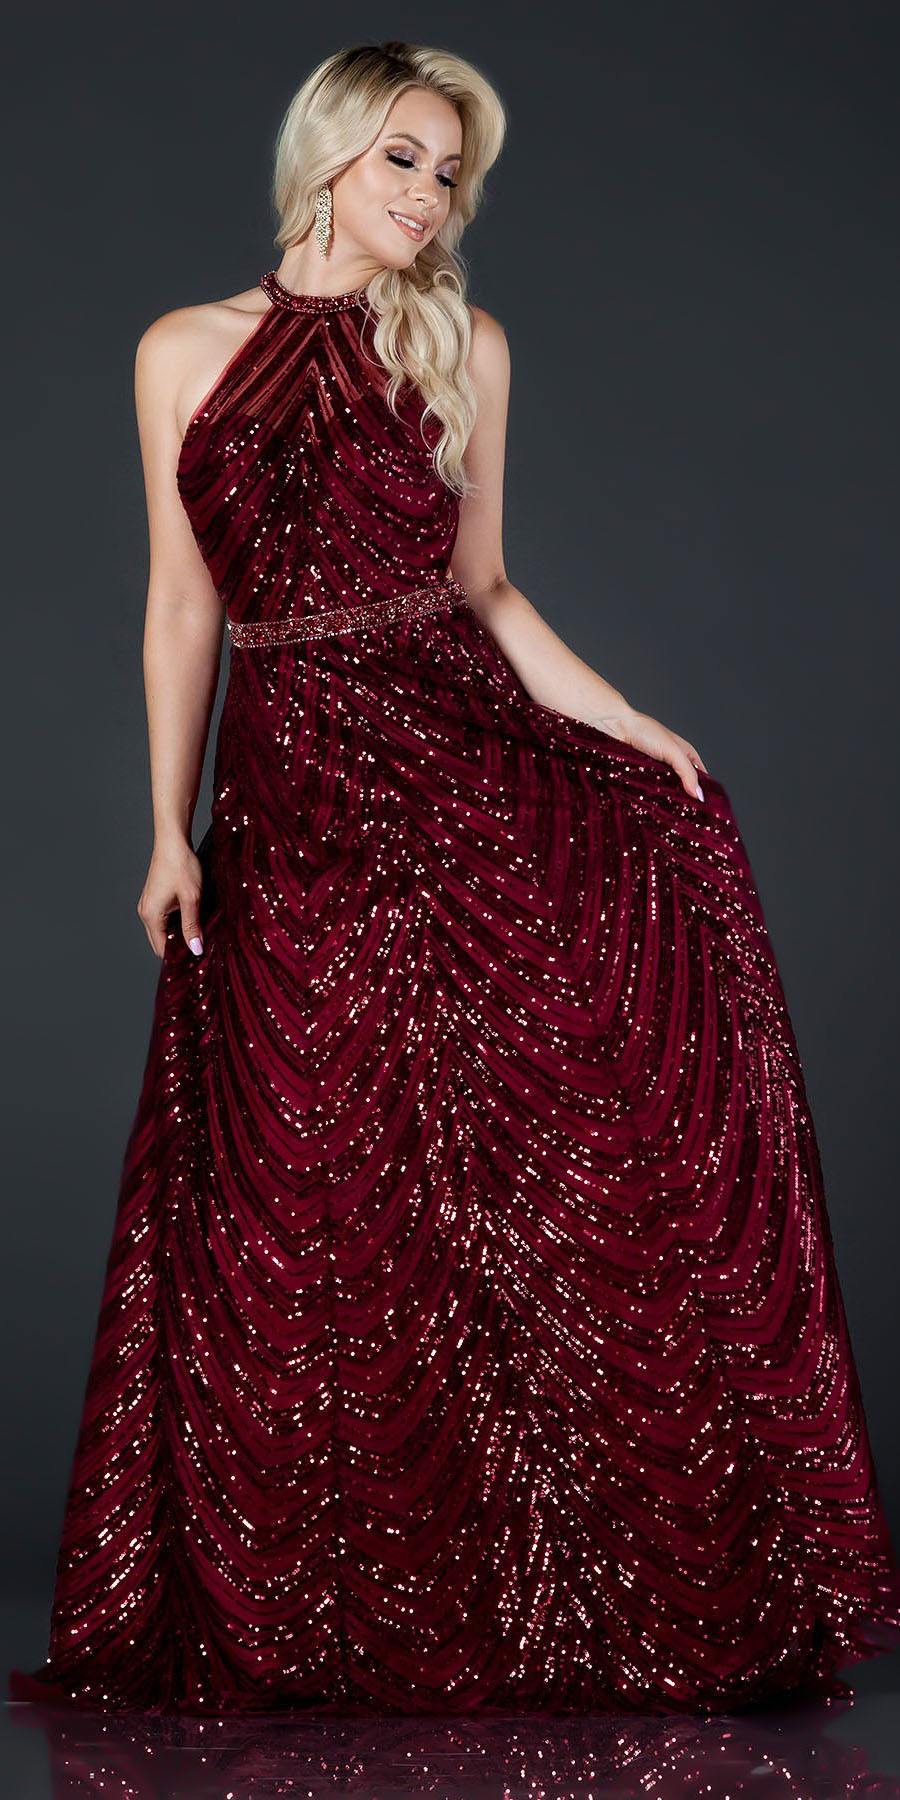 Aspeed L2377 Halter Sequins Long Dress with Open-Back